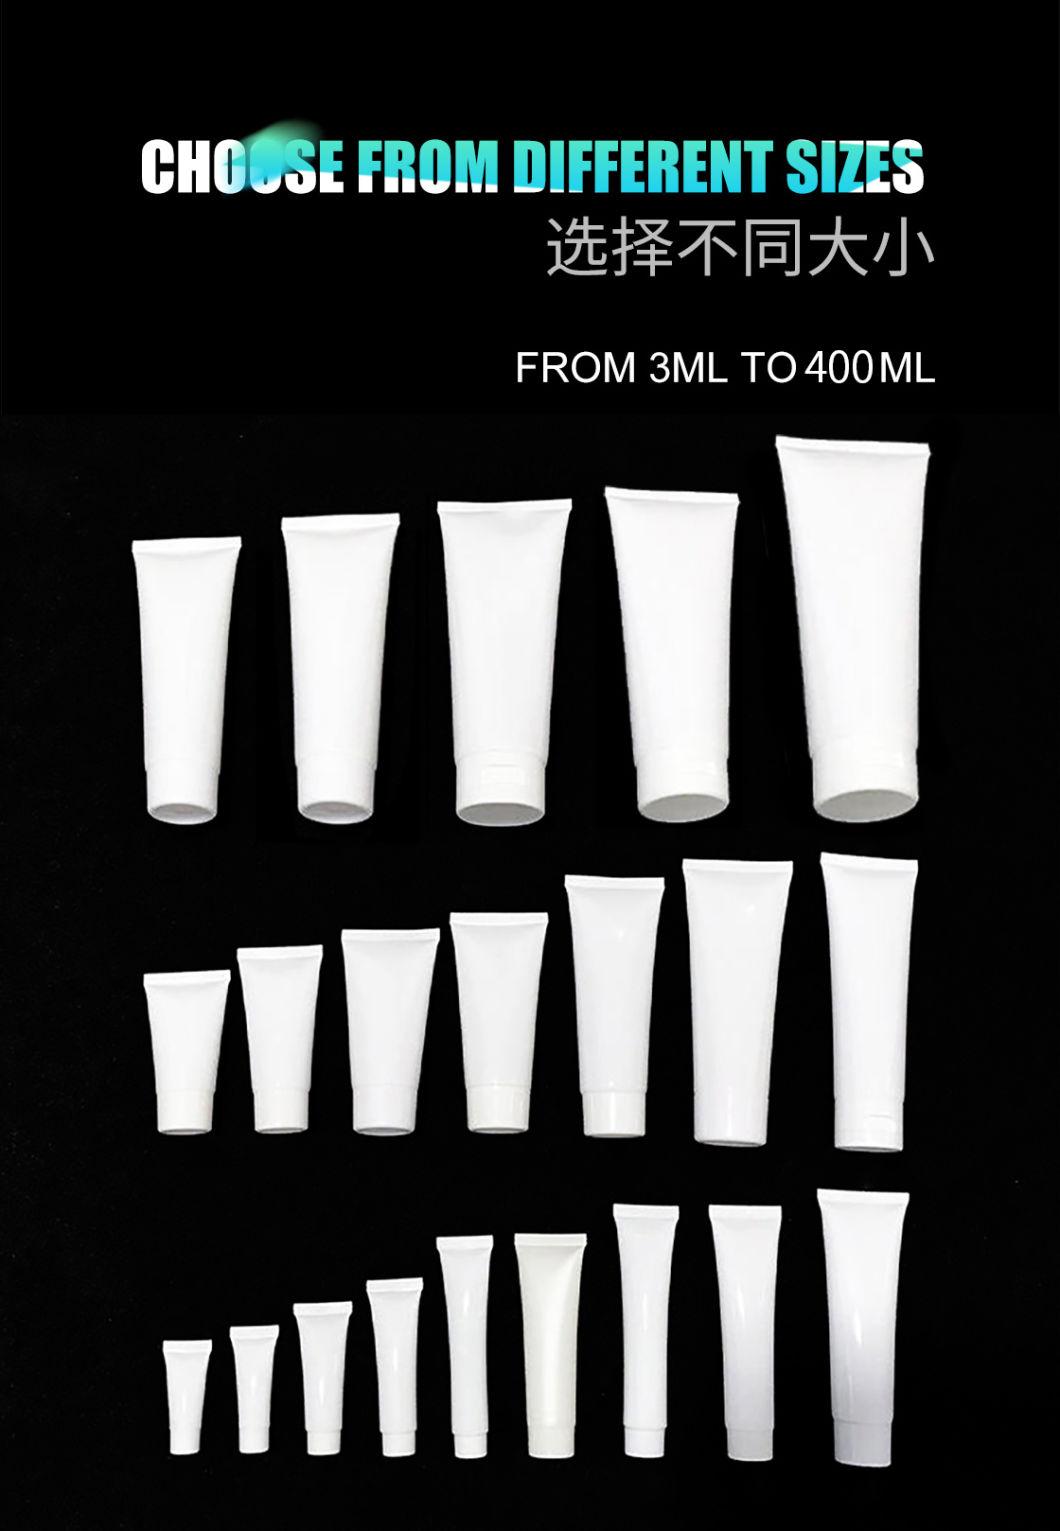 Skincare Sampling Round Matte Pink Cosmetic Soft Light Brown Lotion 100ml Plastic Tubes for Shampoo